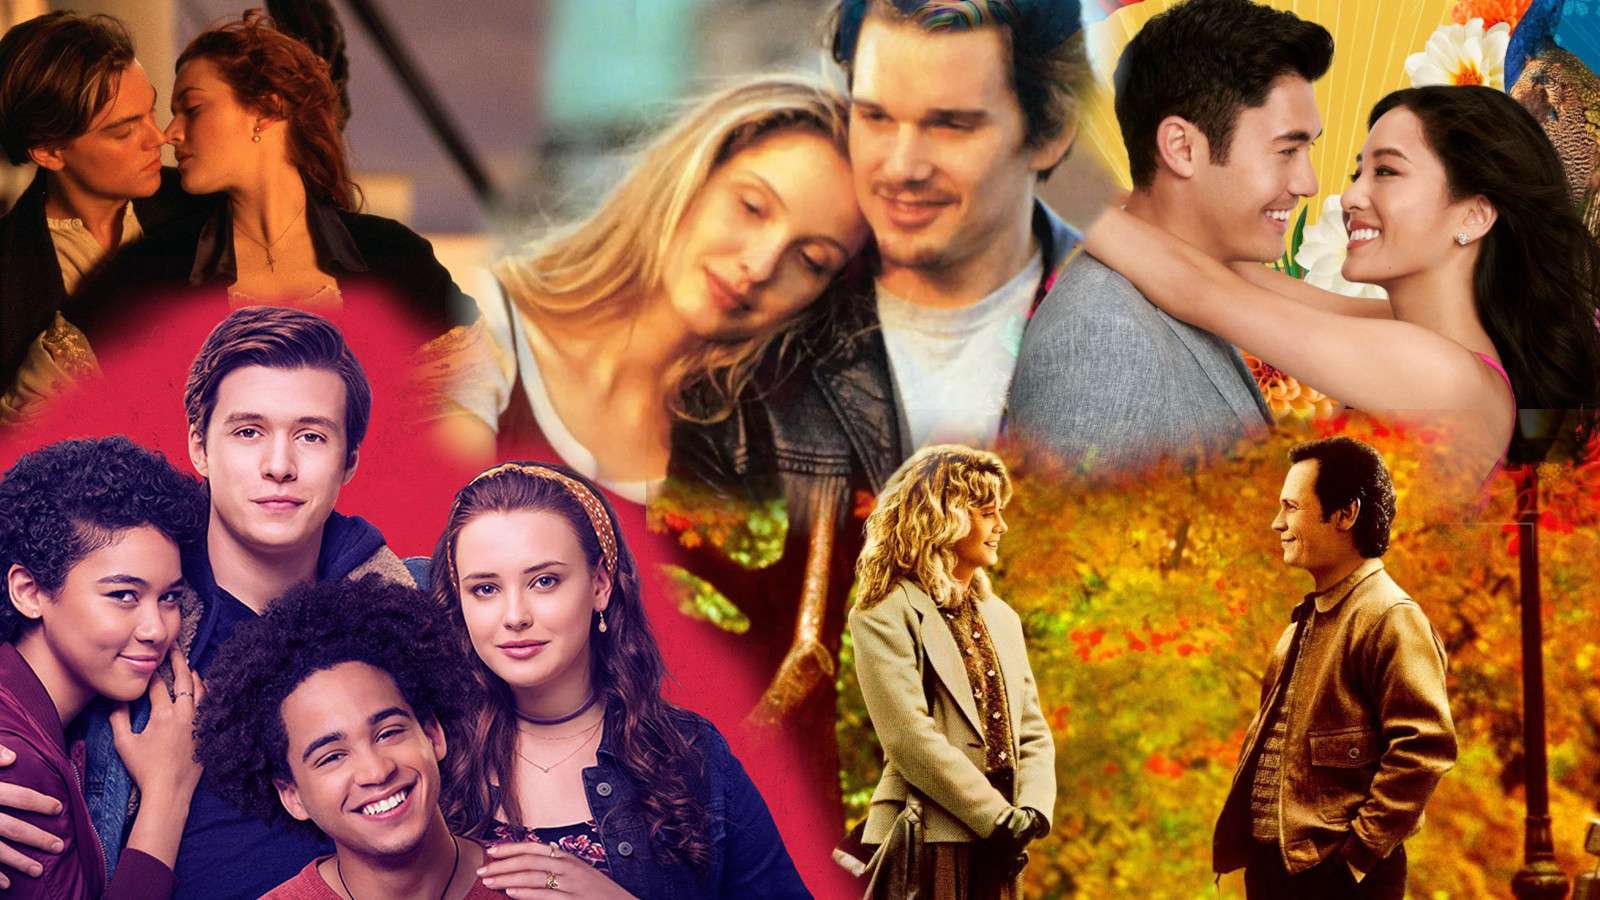 A collage of the best romance movies ever including Titanic, Love, Simon, When harry Met Sally, Crazy Rich Asians, and Before Sunrise.